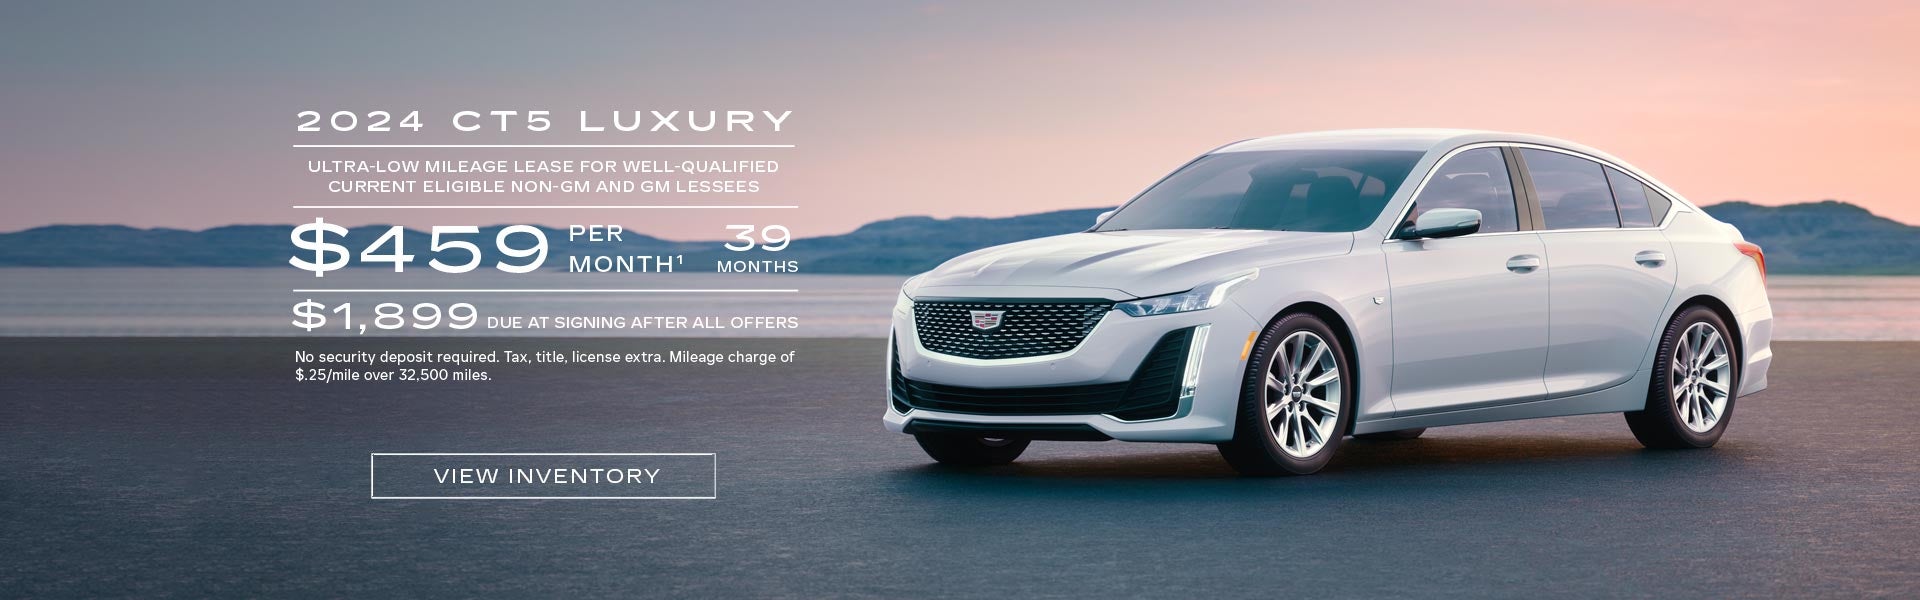 2024 CT5 Luxury. Ultra-low mileage lease for well-qualified current eligible Non-GM and GM Lessee...